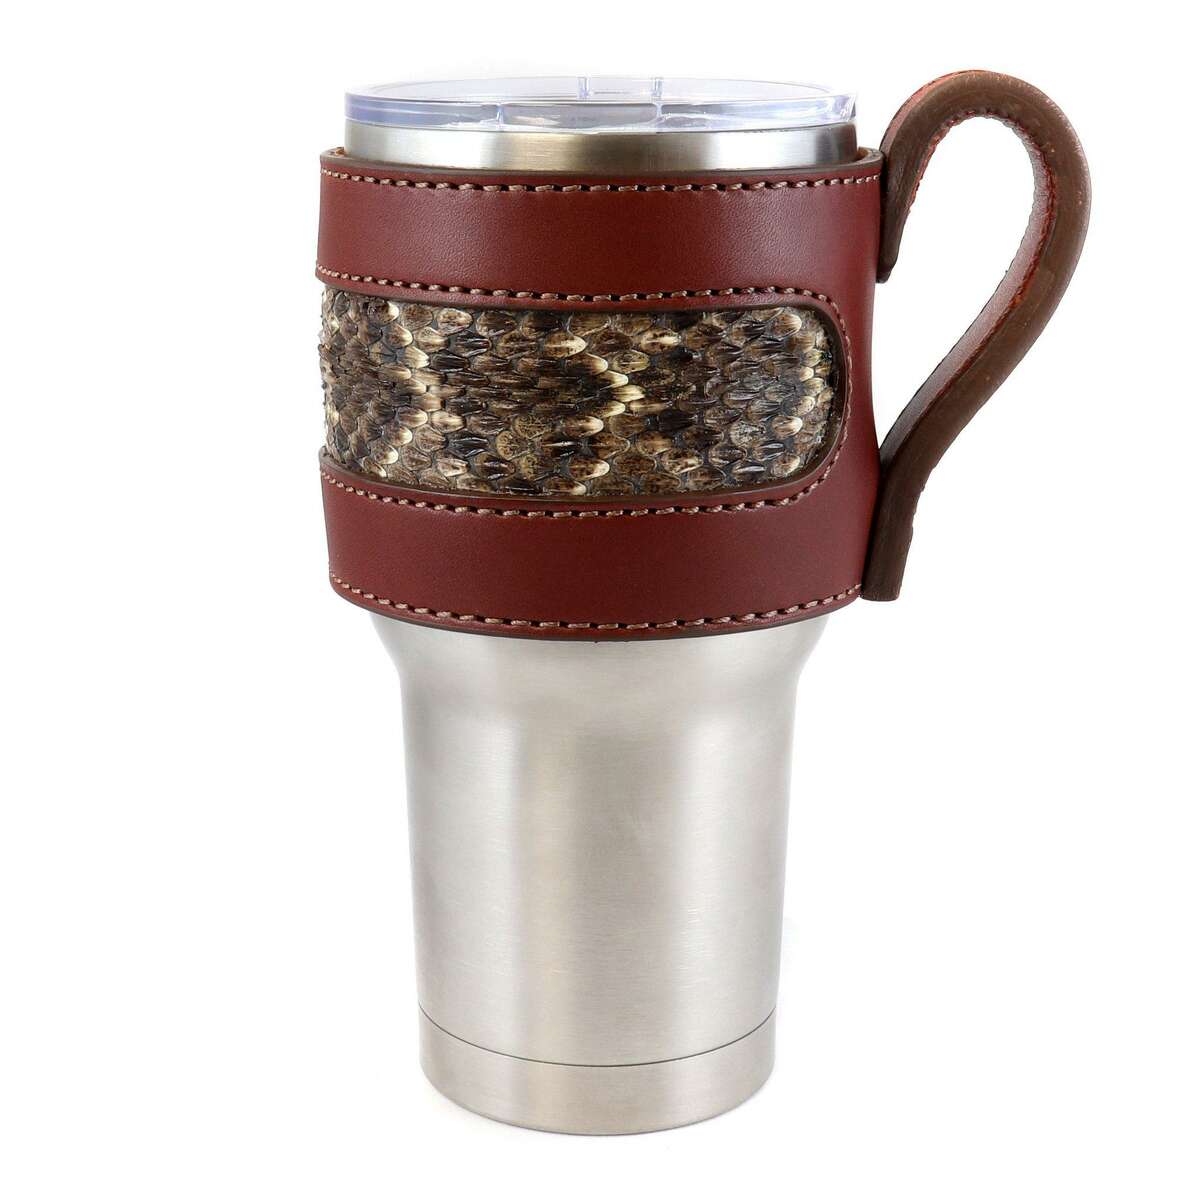 One of several Yeti leather cup handles by Tannare Leather in San Antonio. The leather handles start at $35.